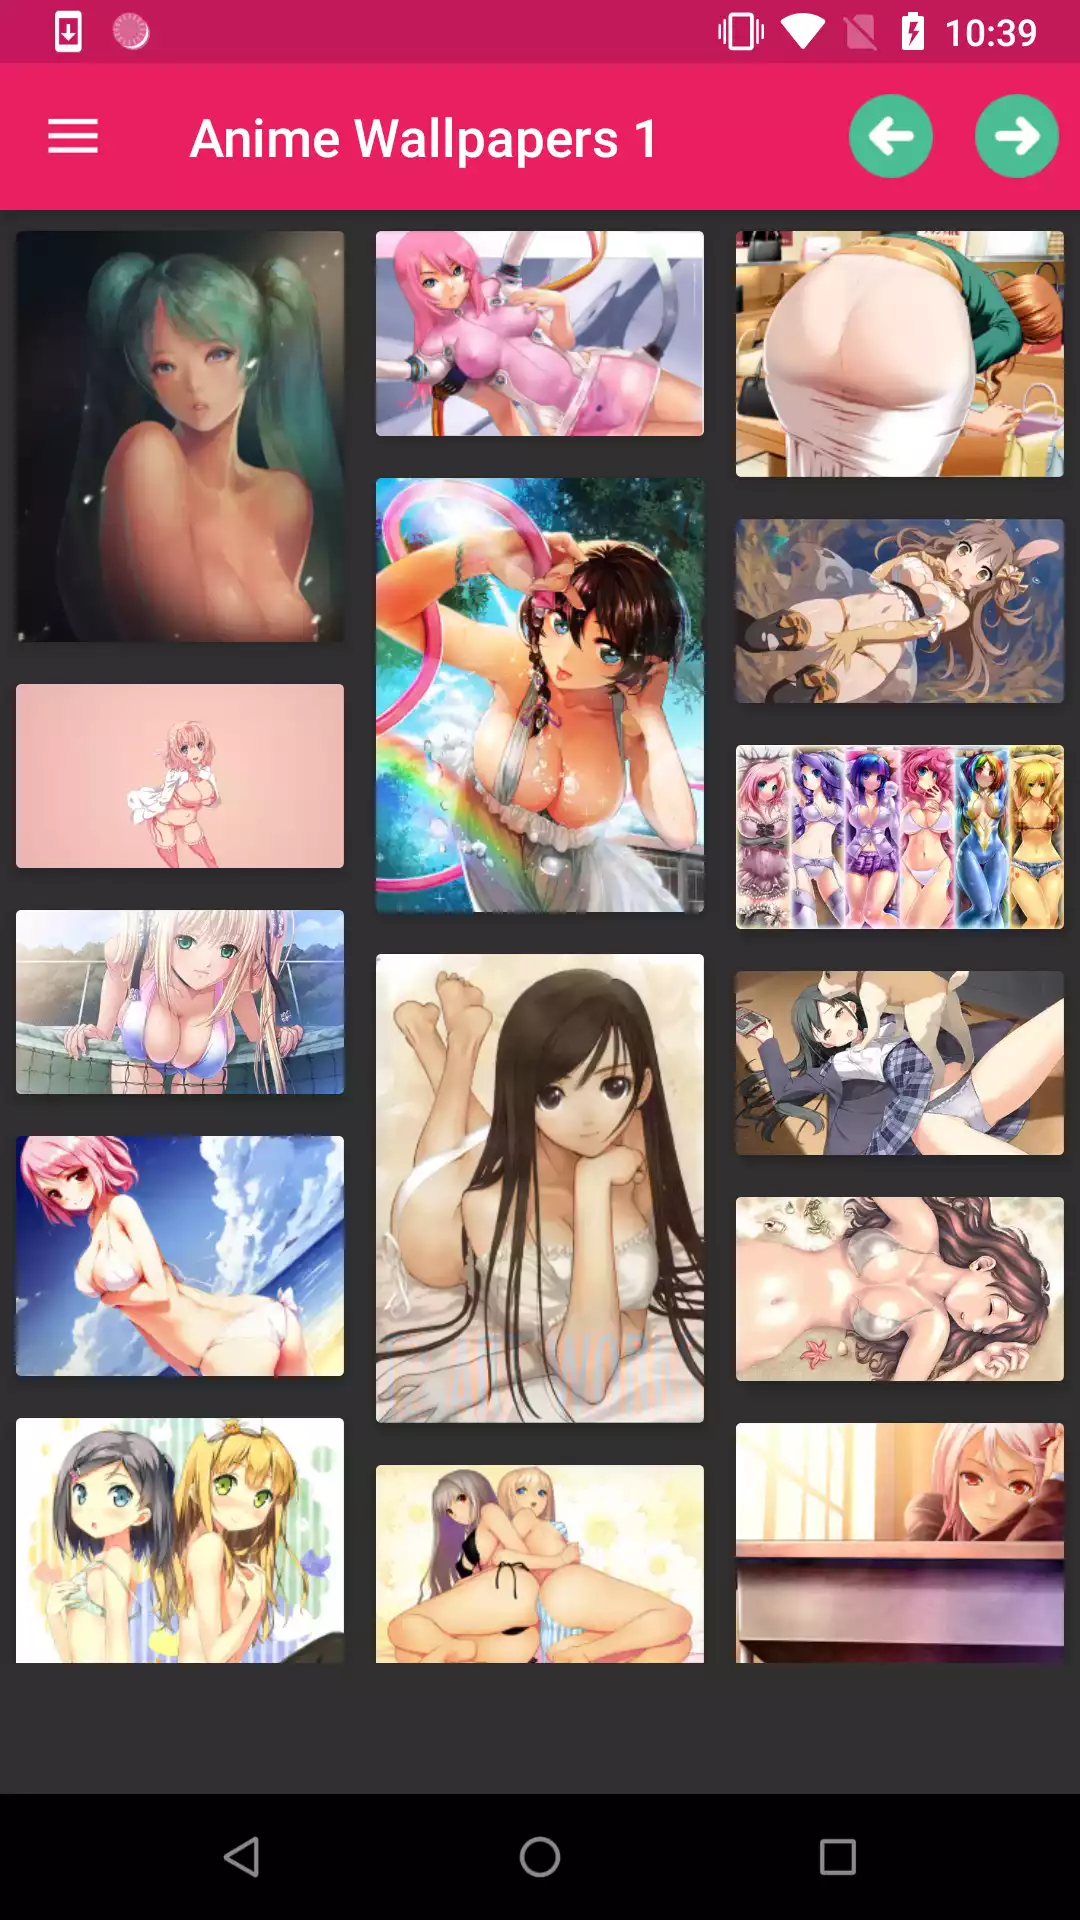 Sexy Anime Girls Wallpapers download,pic,anime,hentsi,henta,backgrounds,pics,app,apk,best,wallpaper,apps,wallpapers,girls,sexy,gallery,henati,hentai,adultwallpapers,panties